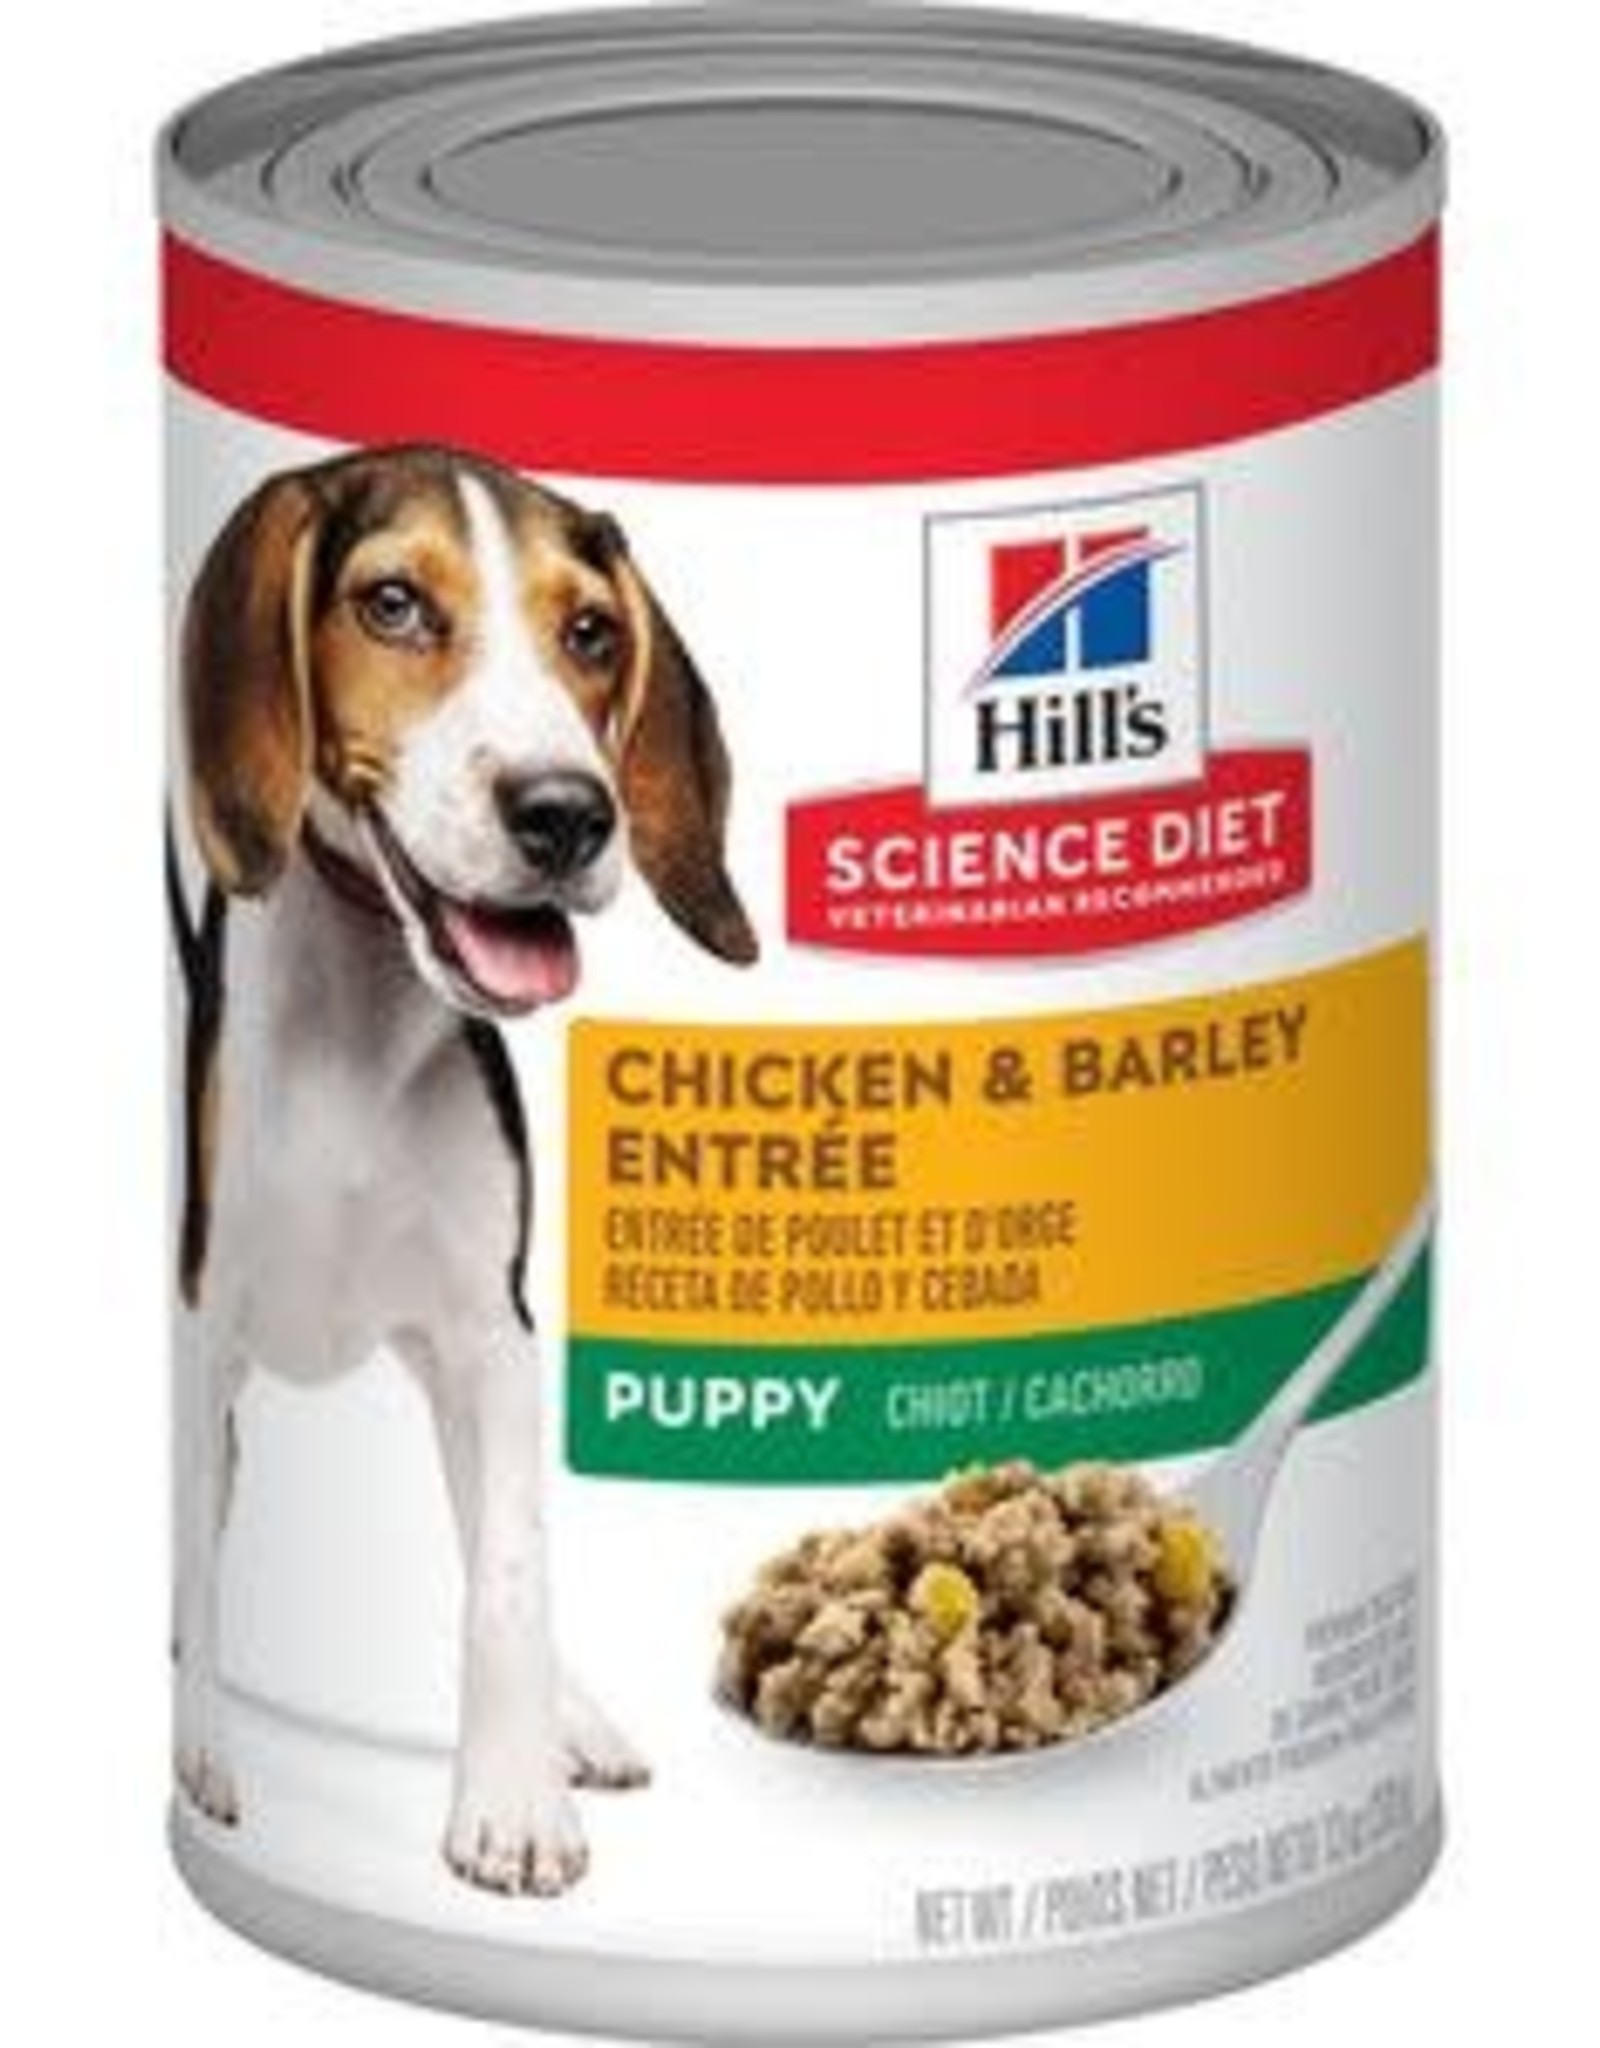 Hill's Science Diet Hill's SDPuppy Chicken & Barley Entrée CAN